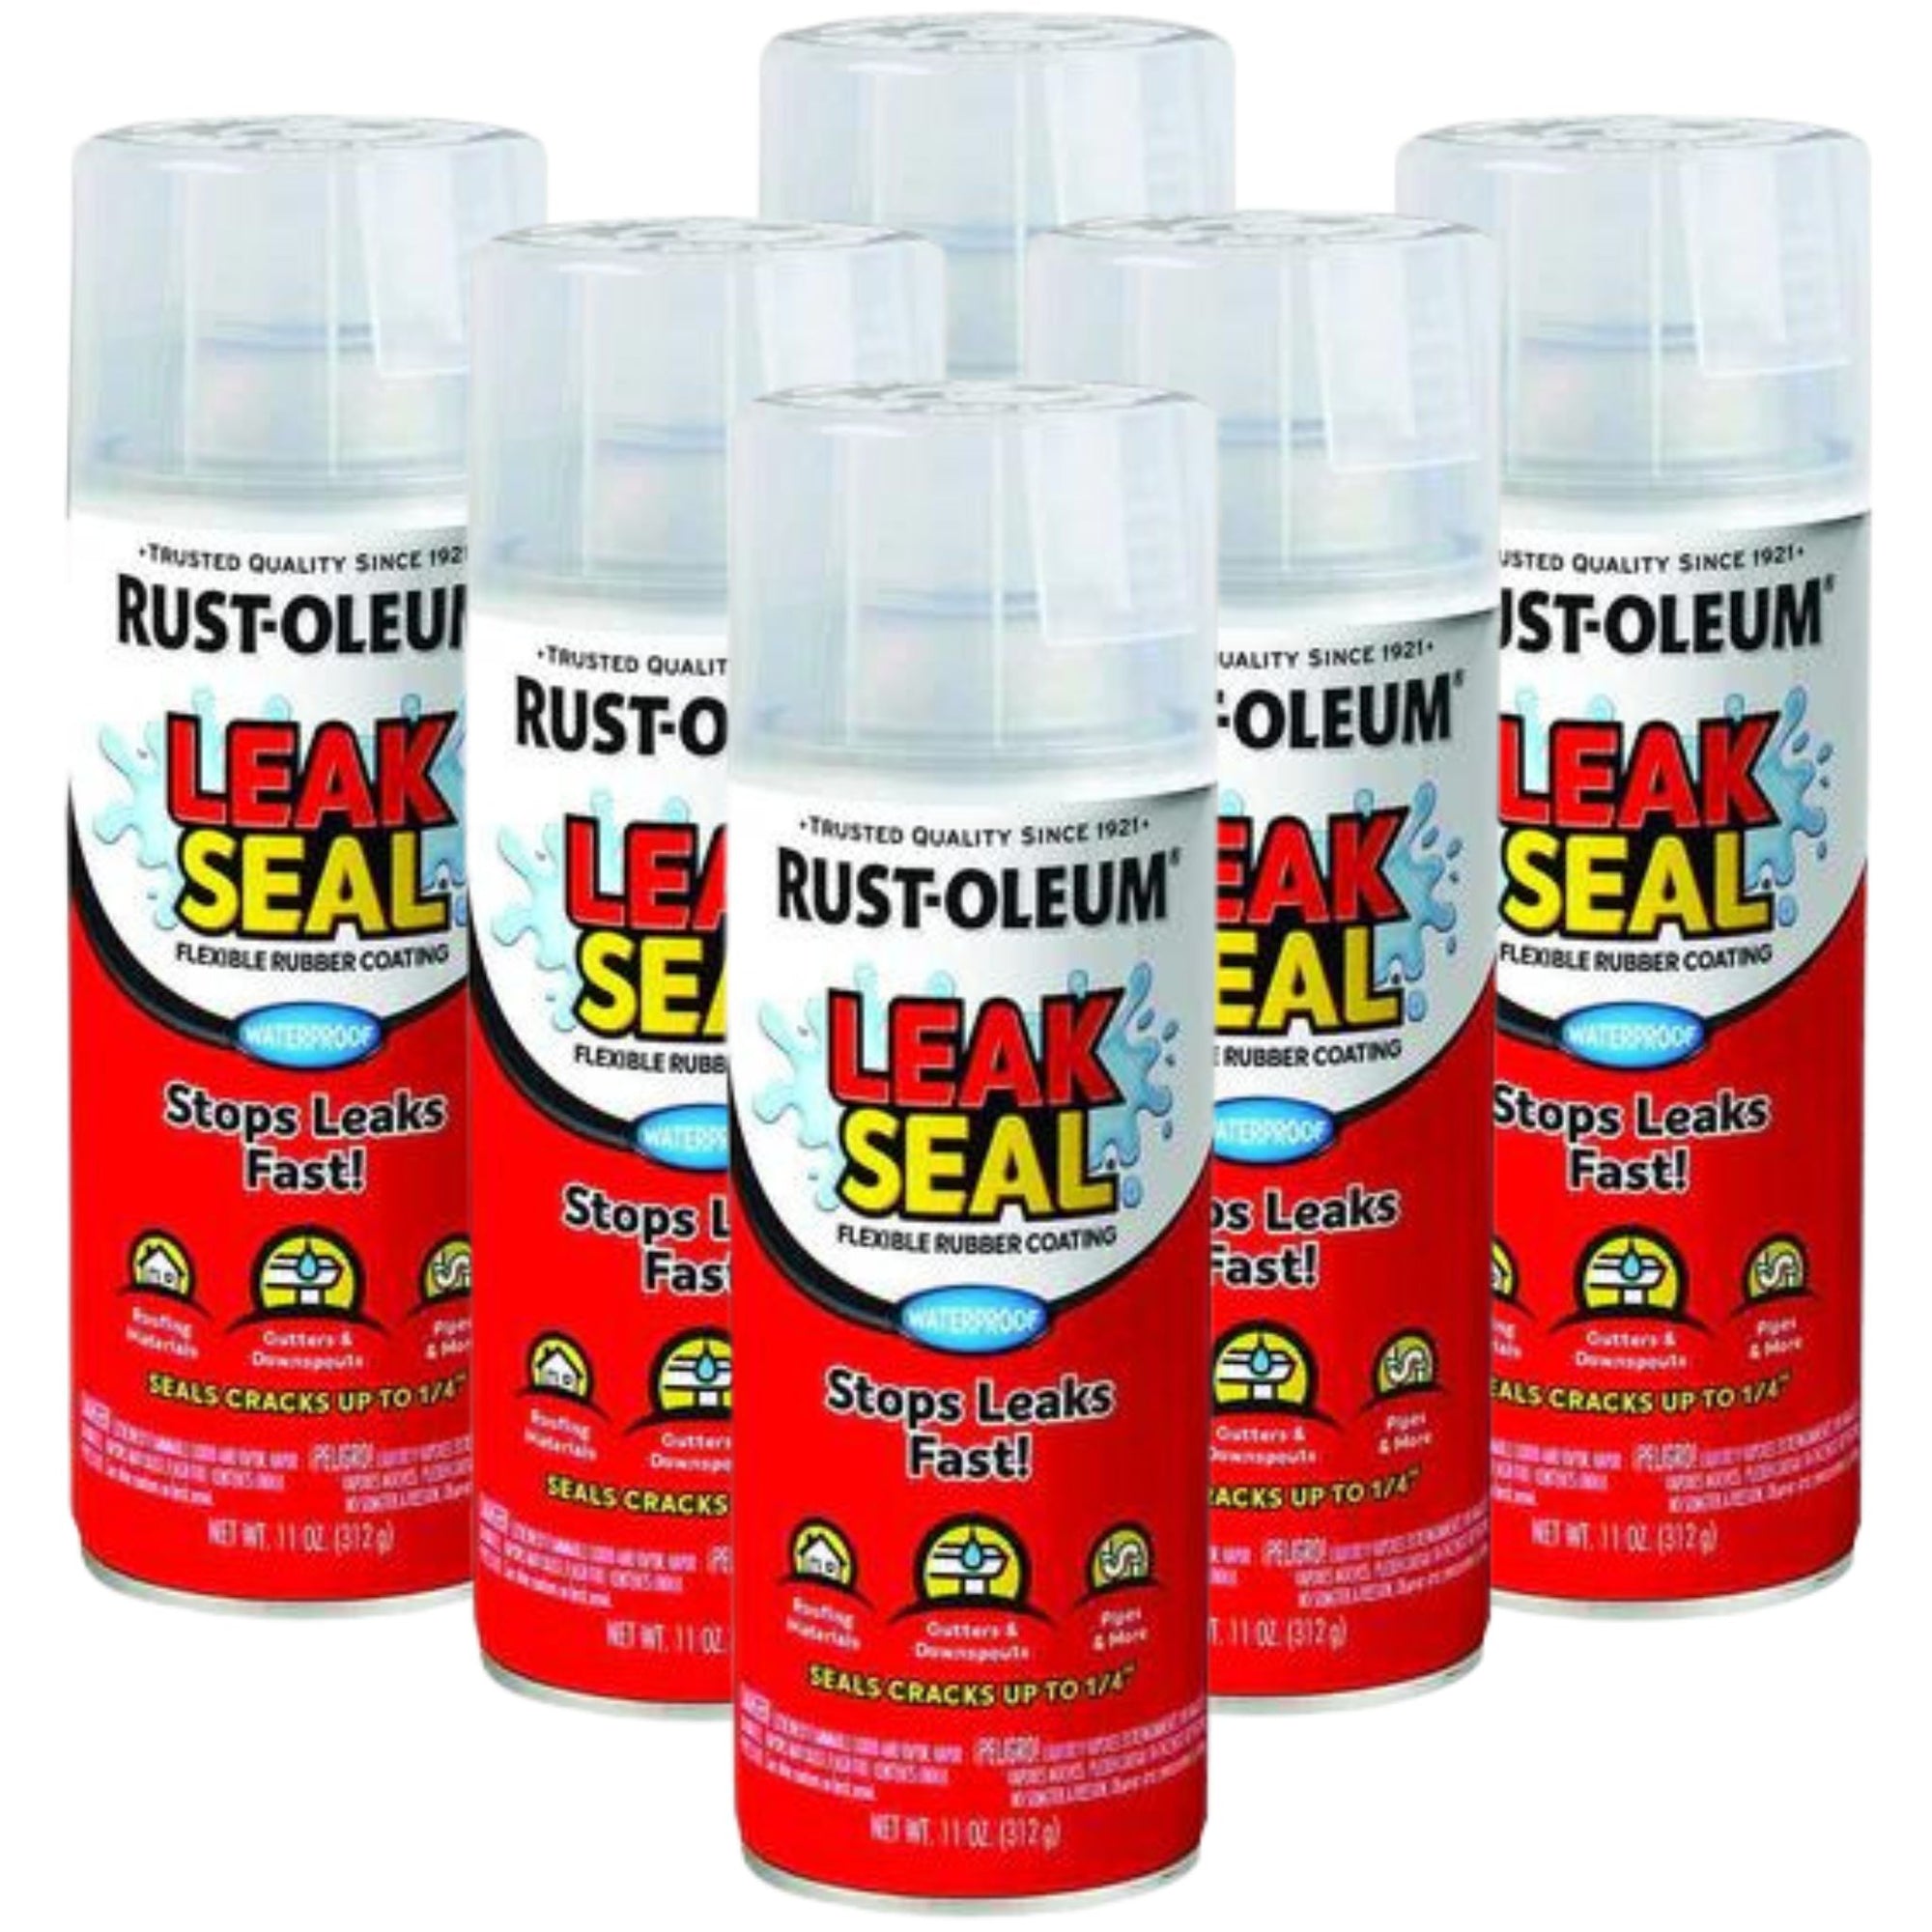 6 Cans | Rust-Oleum 340g Leakseal Rubberised Coating Spray | CLEAR 273564 - South East Clearance Centre